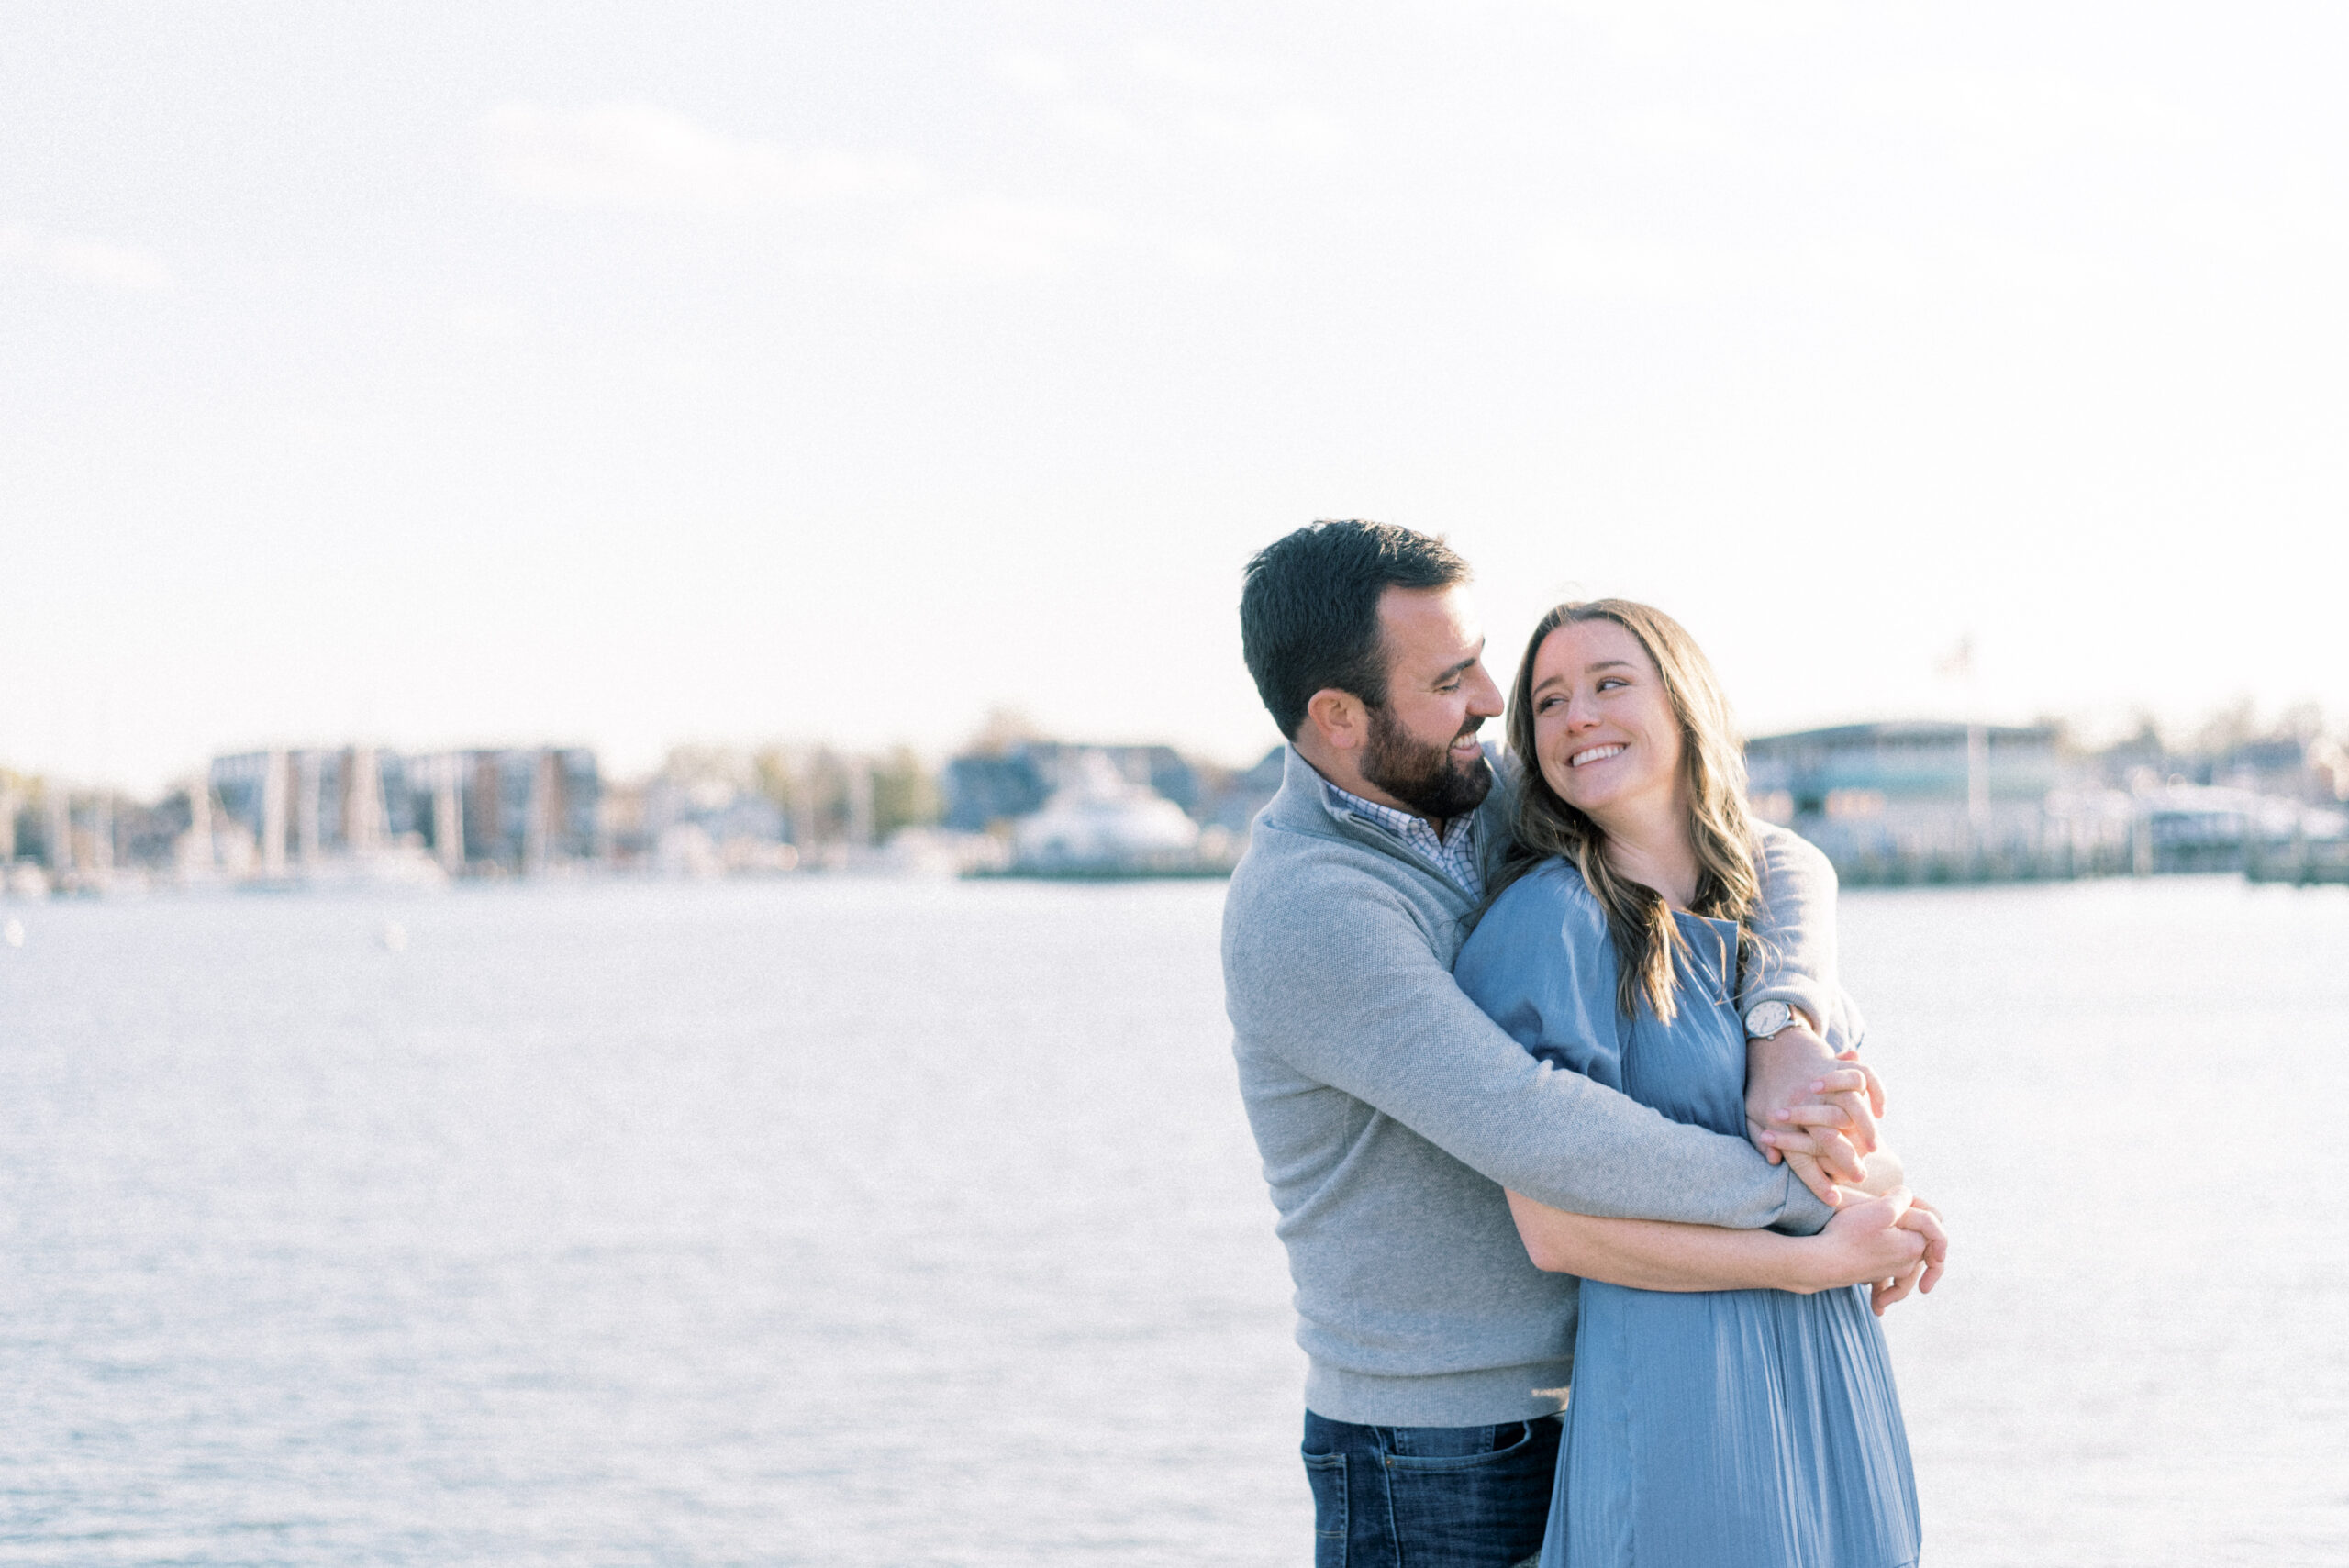 Maryland wedding photographer captures man holding woman and laughing together